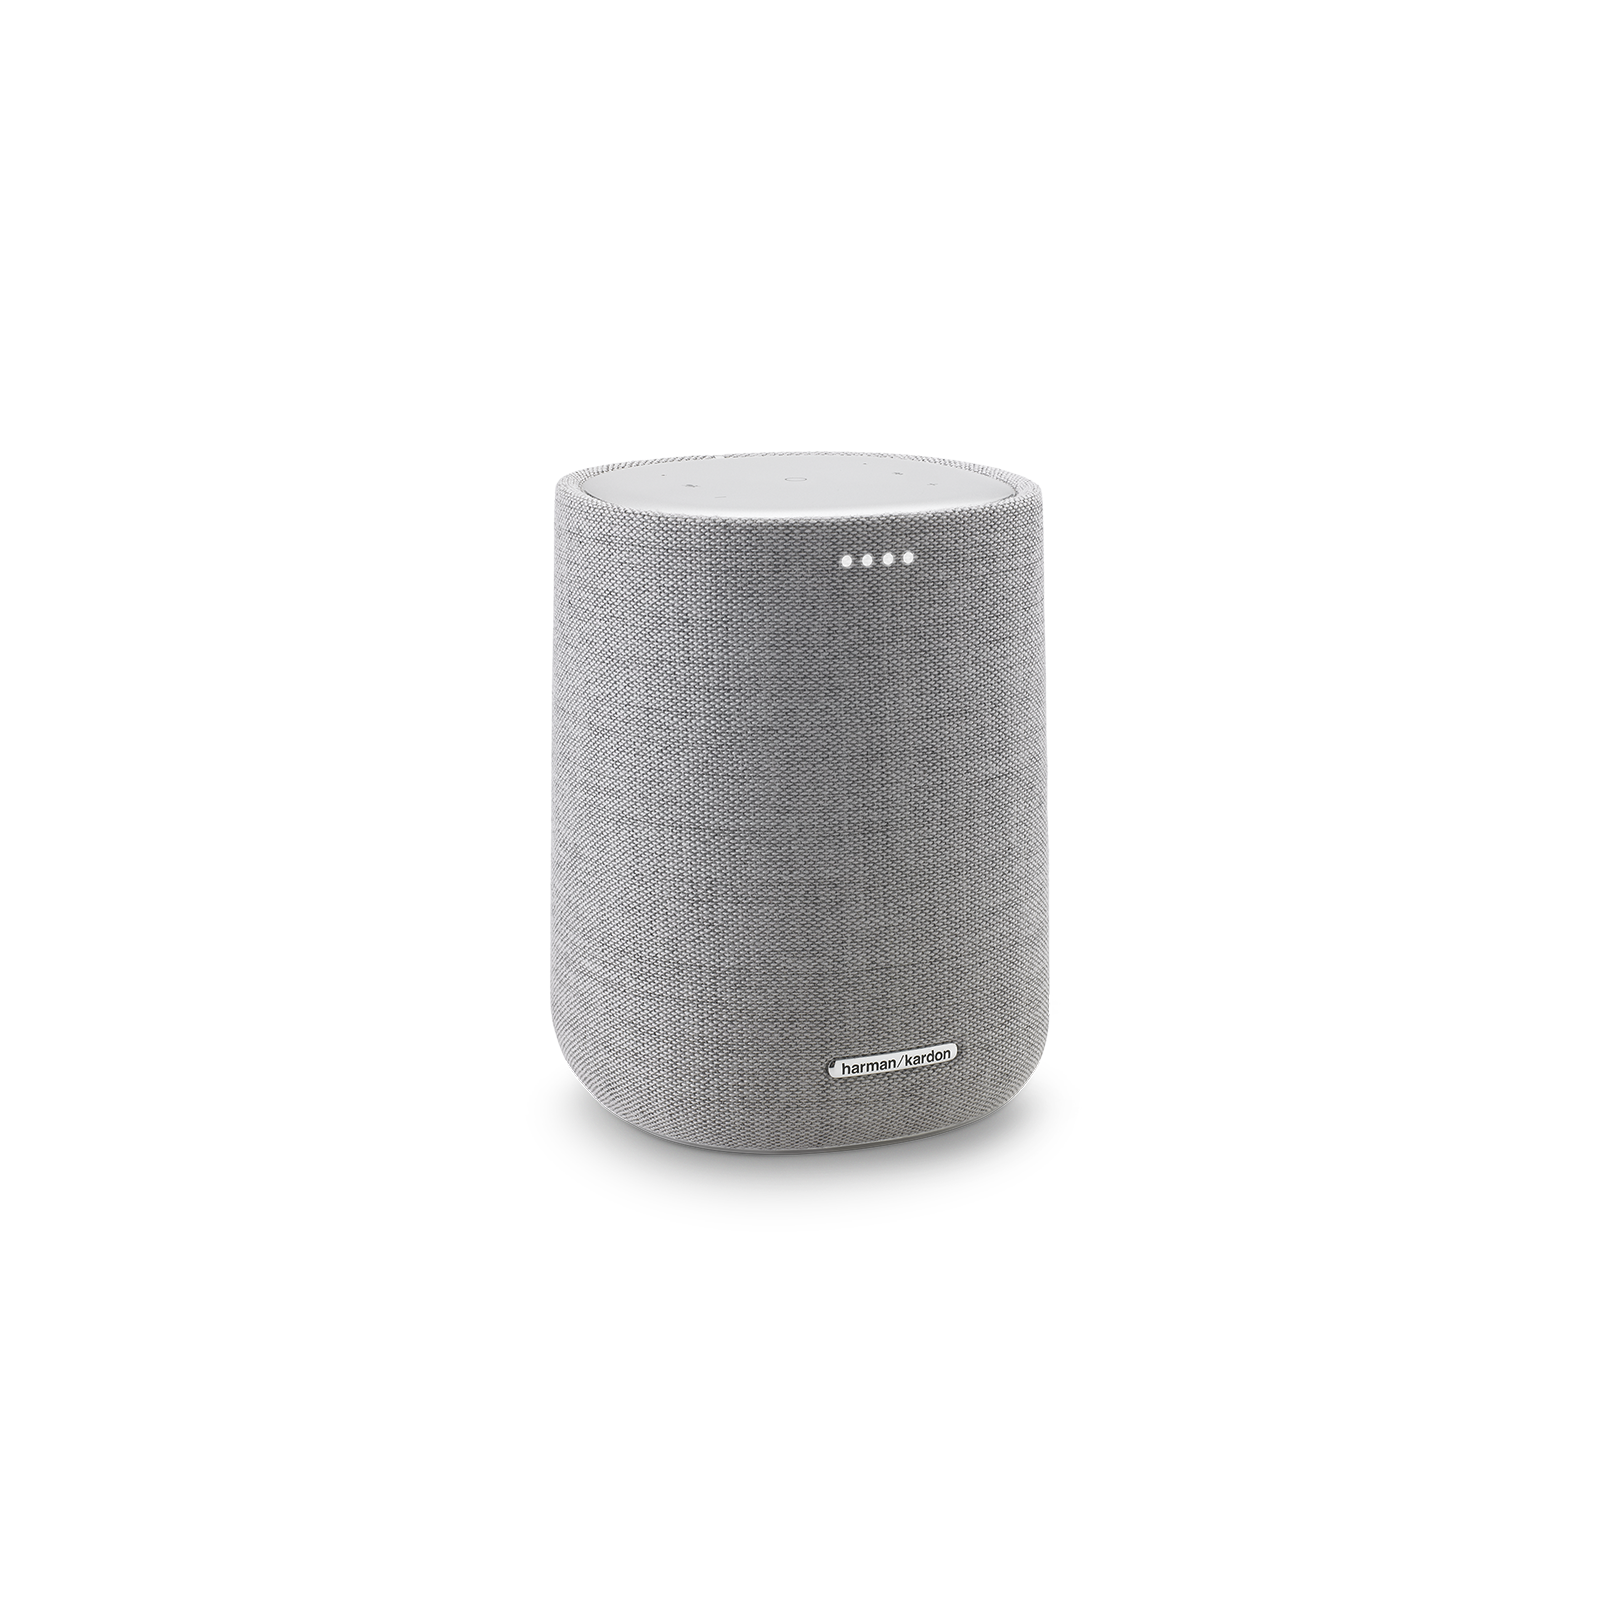 Harman Kardon Citation One MKII - Grey - All-in-one smart speaker with room-filling sound - Hero